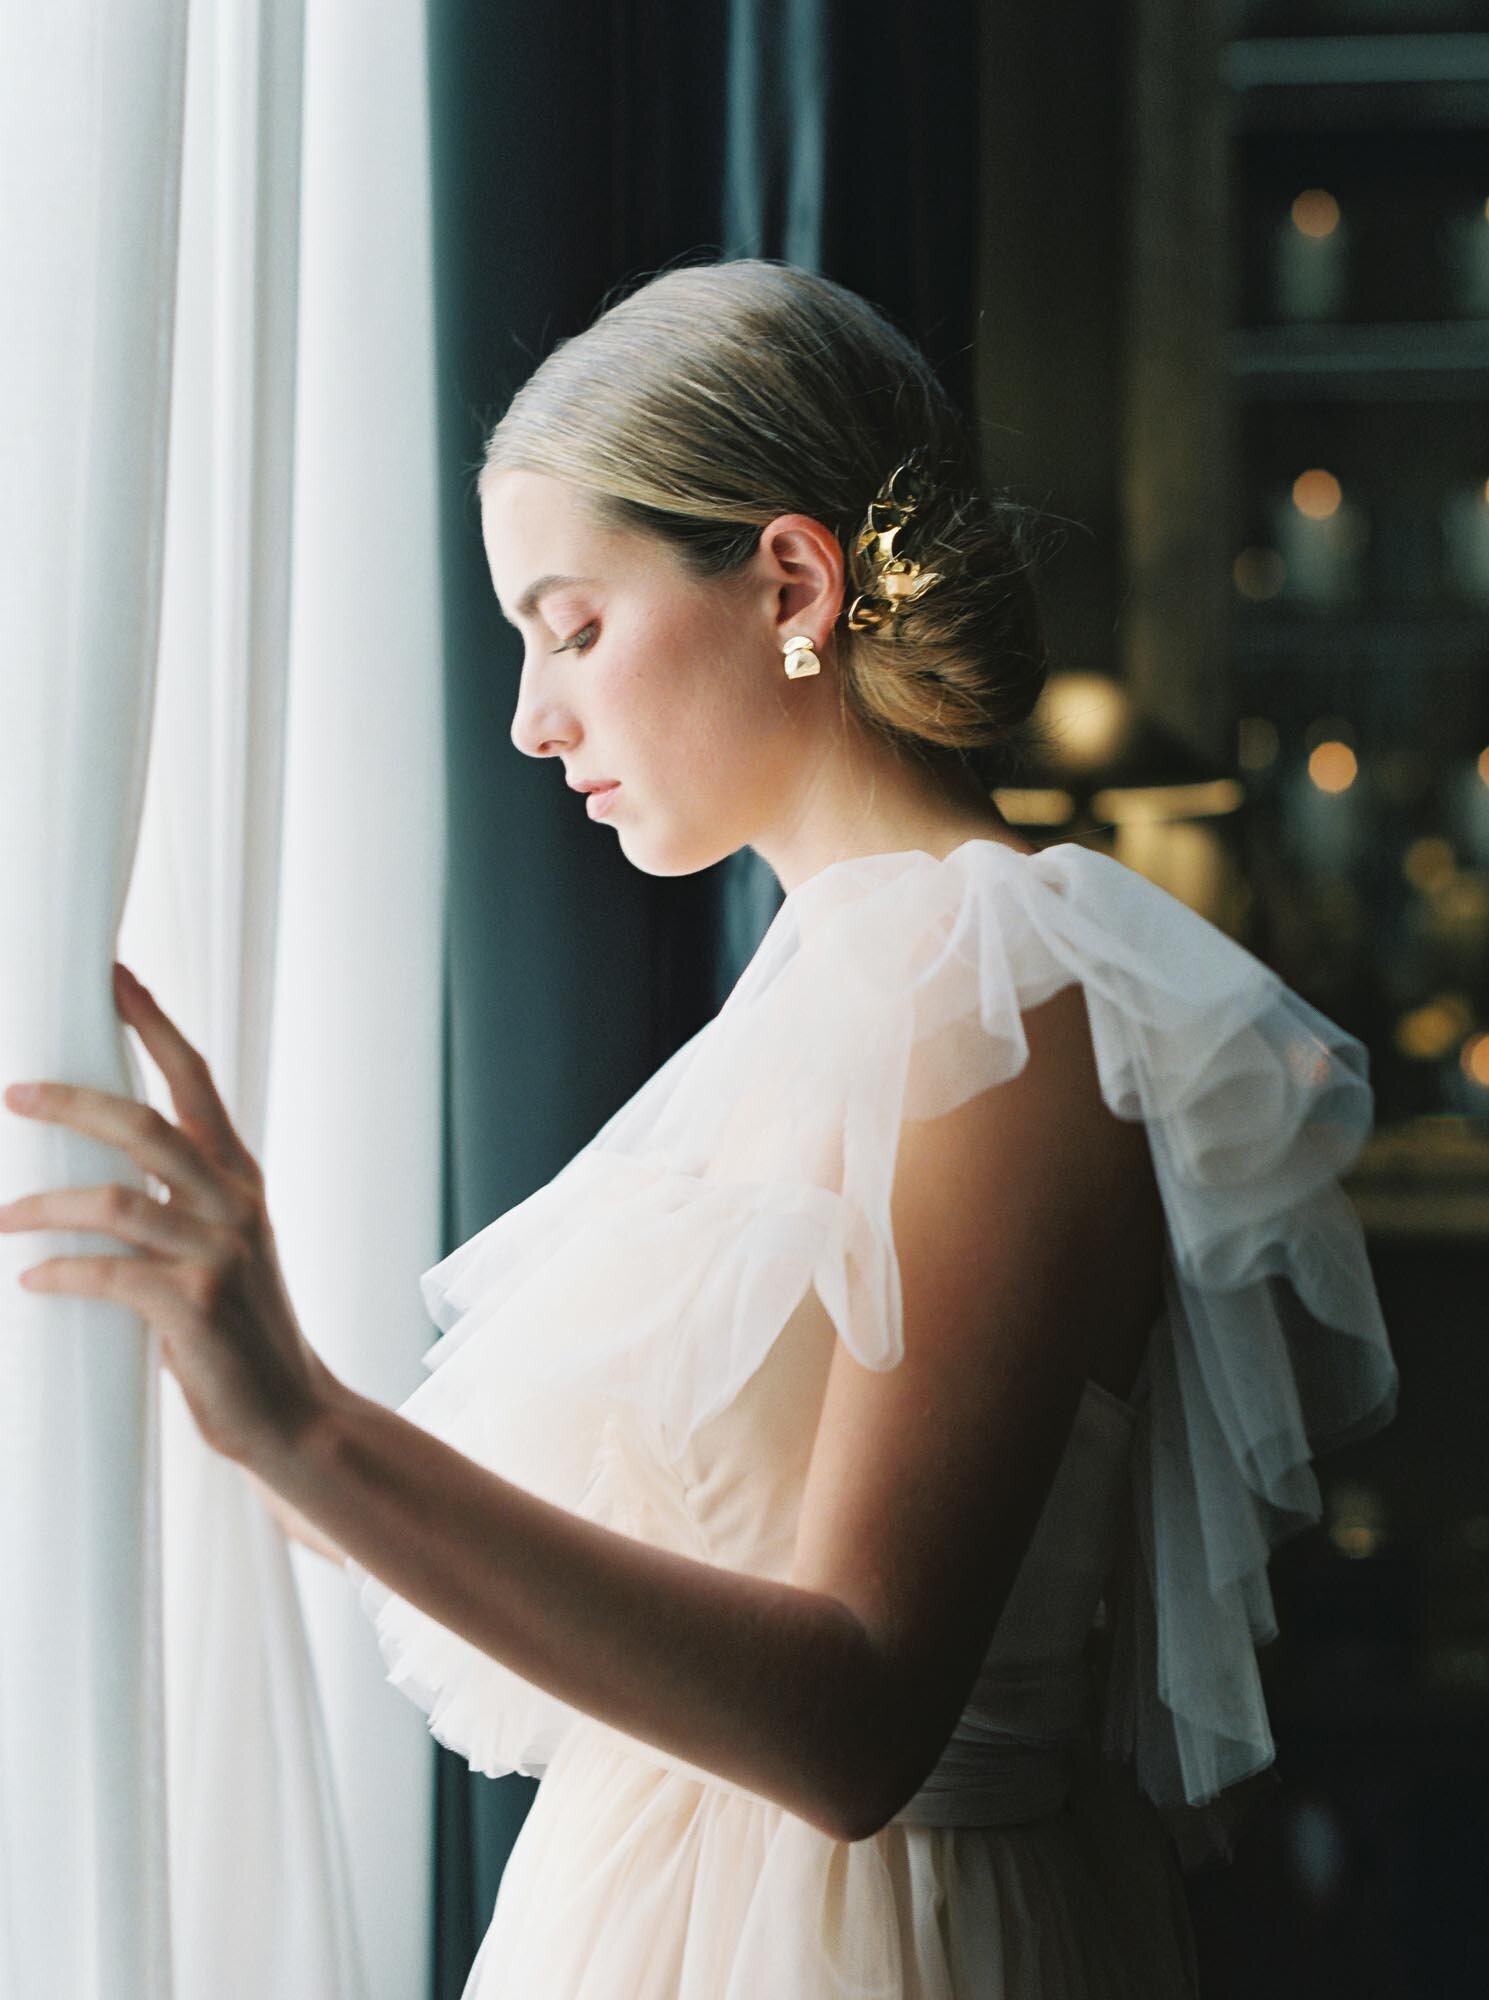 Young bride looking out of the window